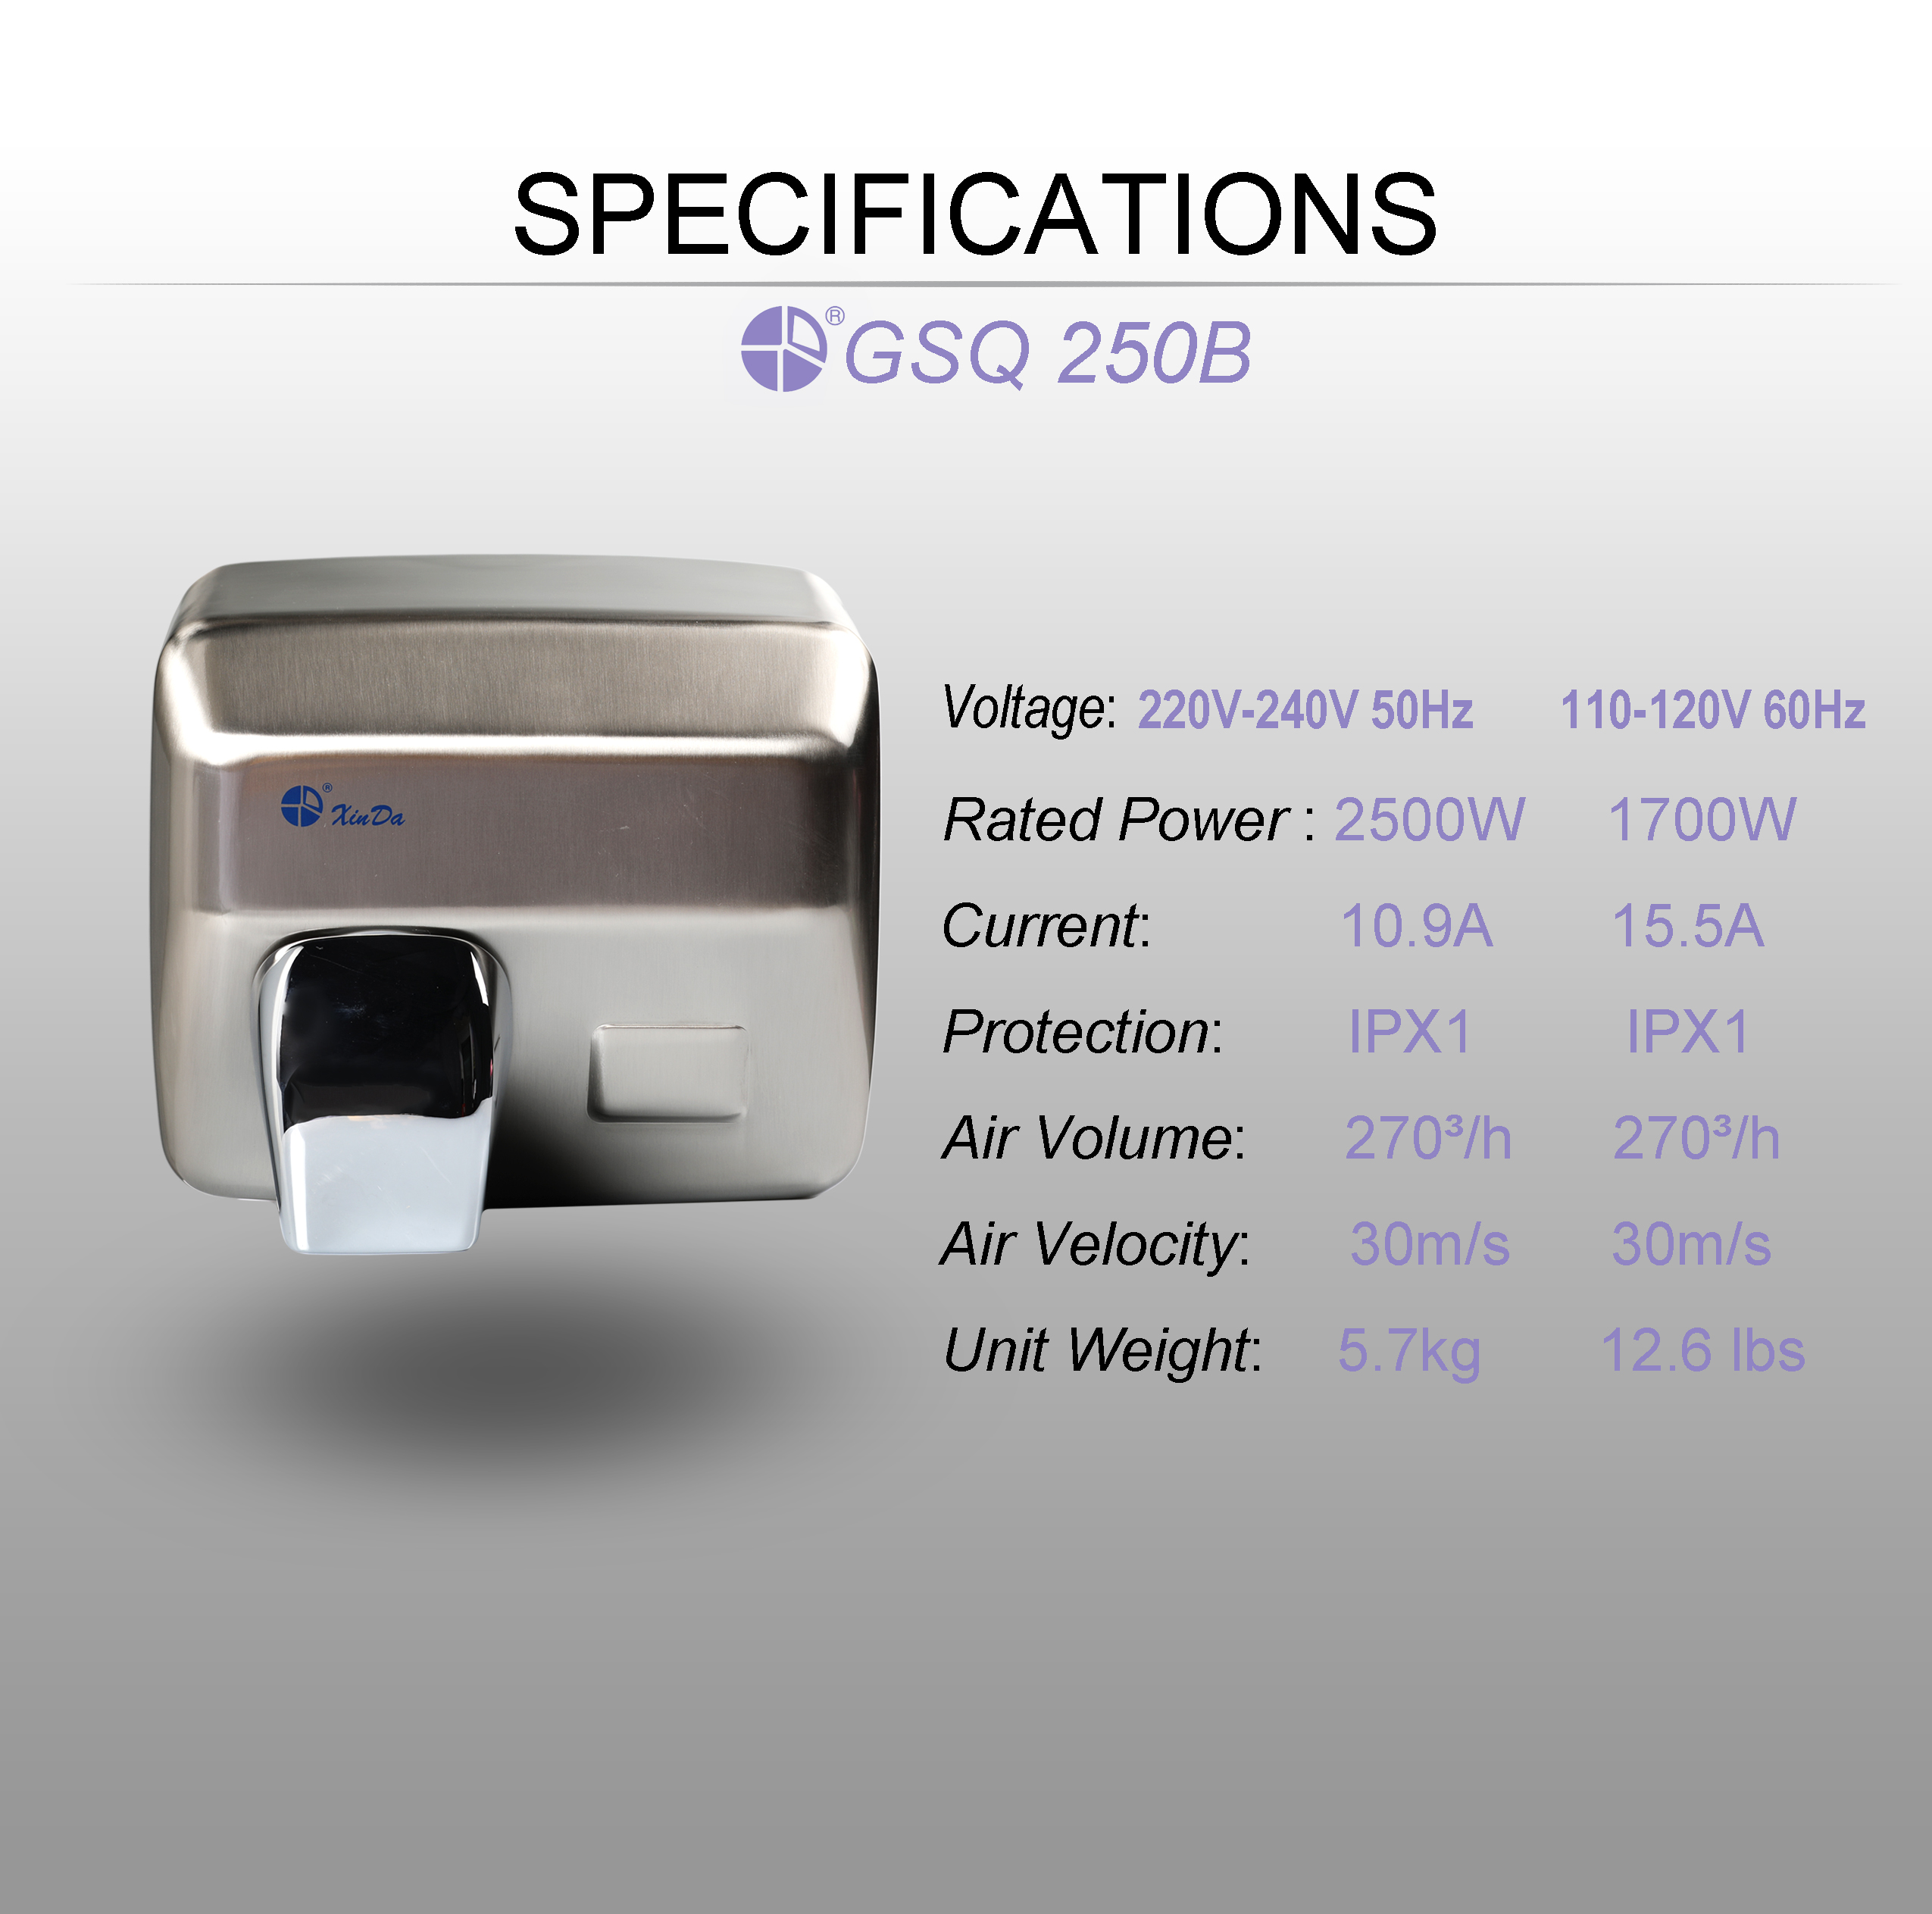 The XinDa GSQ250B High Quality Canteen Toilet Low Noise Automatic Commercial Sensor Hand Dryer Hand Dryer